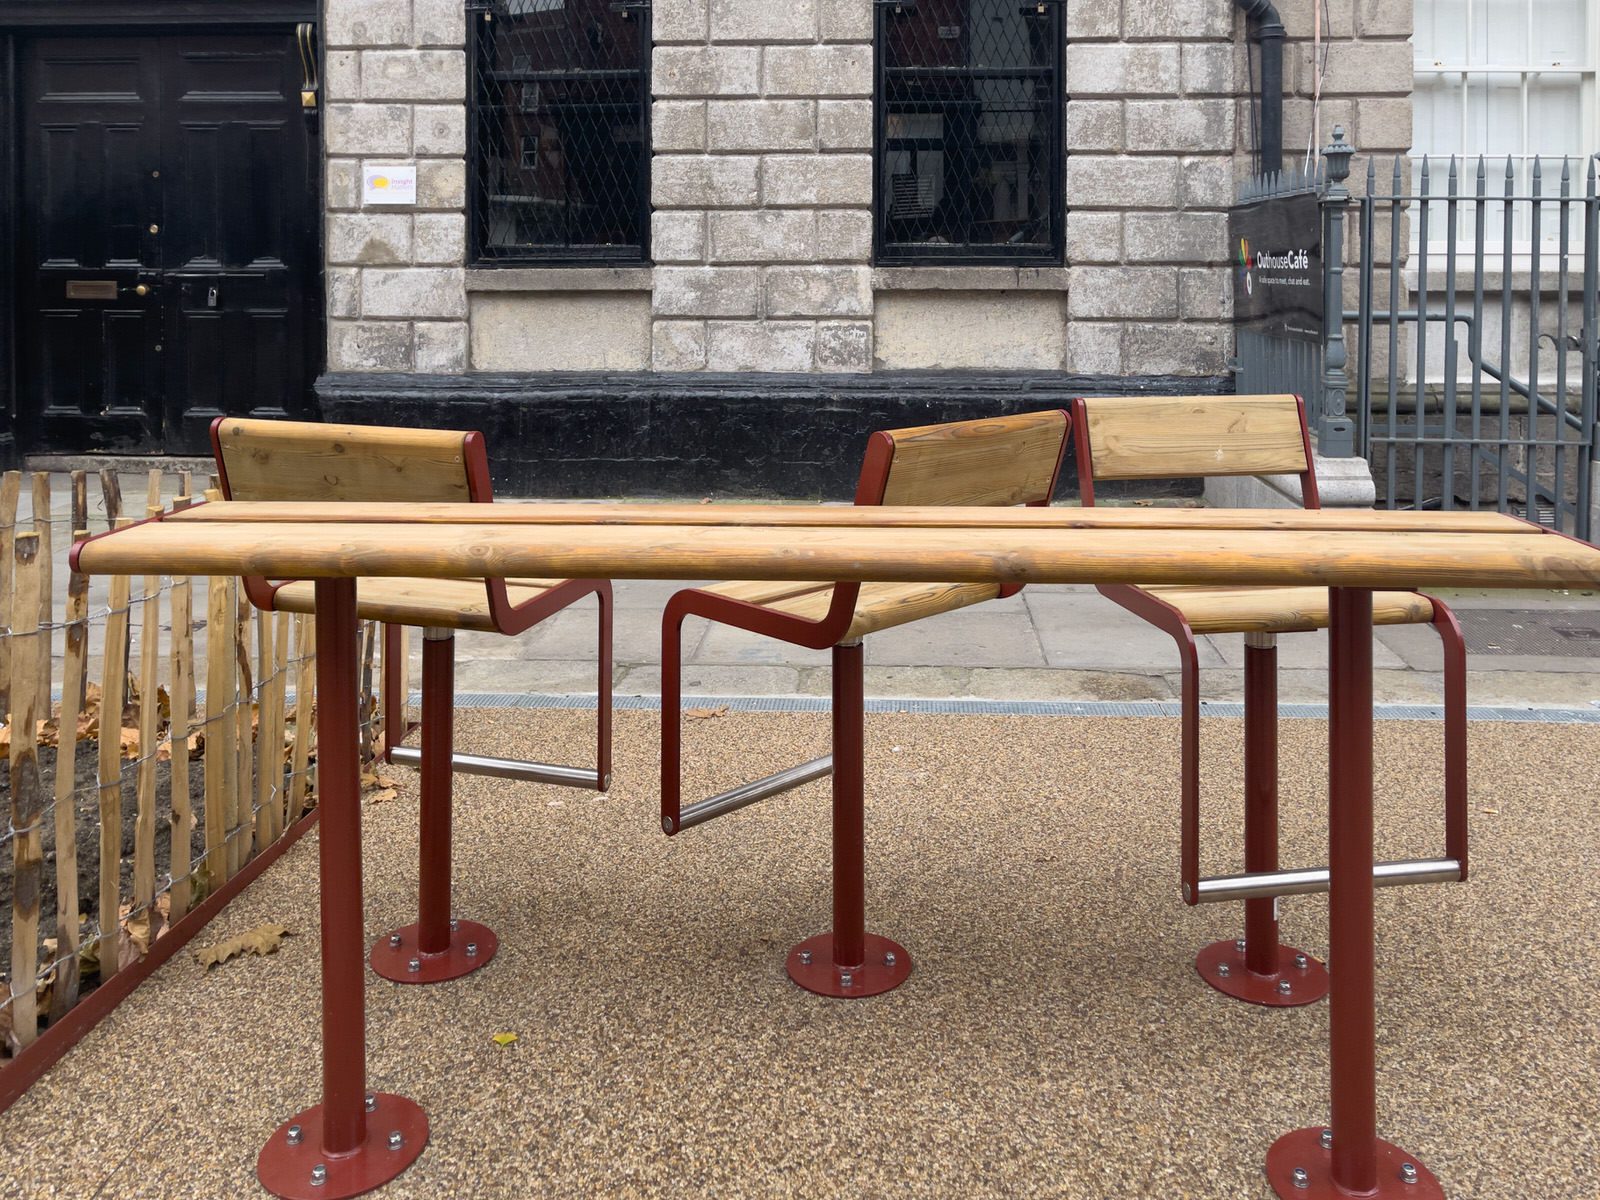 THE NEW STREET FURNITURE IS BEING INSTALLED ON CAPEL STREET [BUT THERE ARE FEW VISITORS TO BE SEEN TODAY]-225421-1